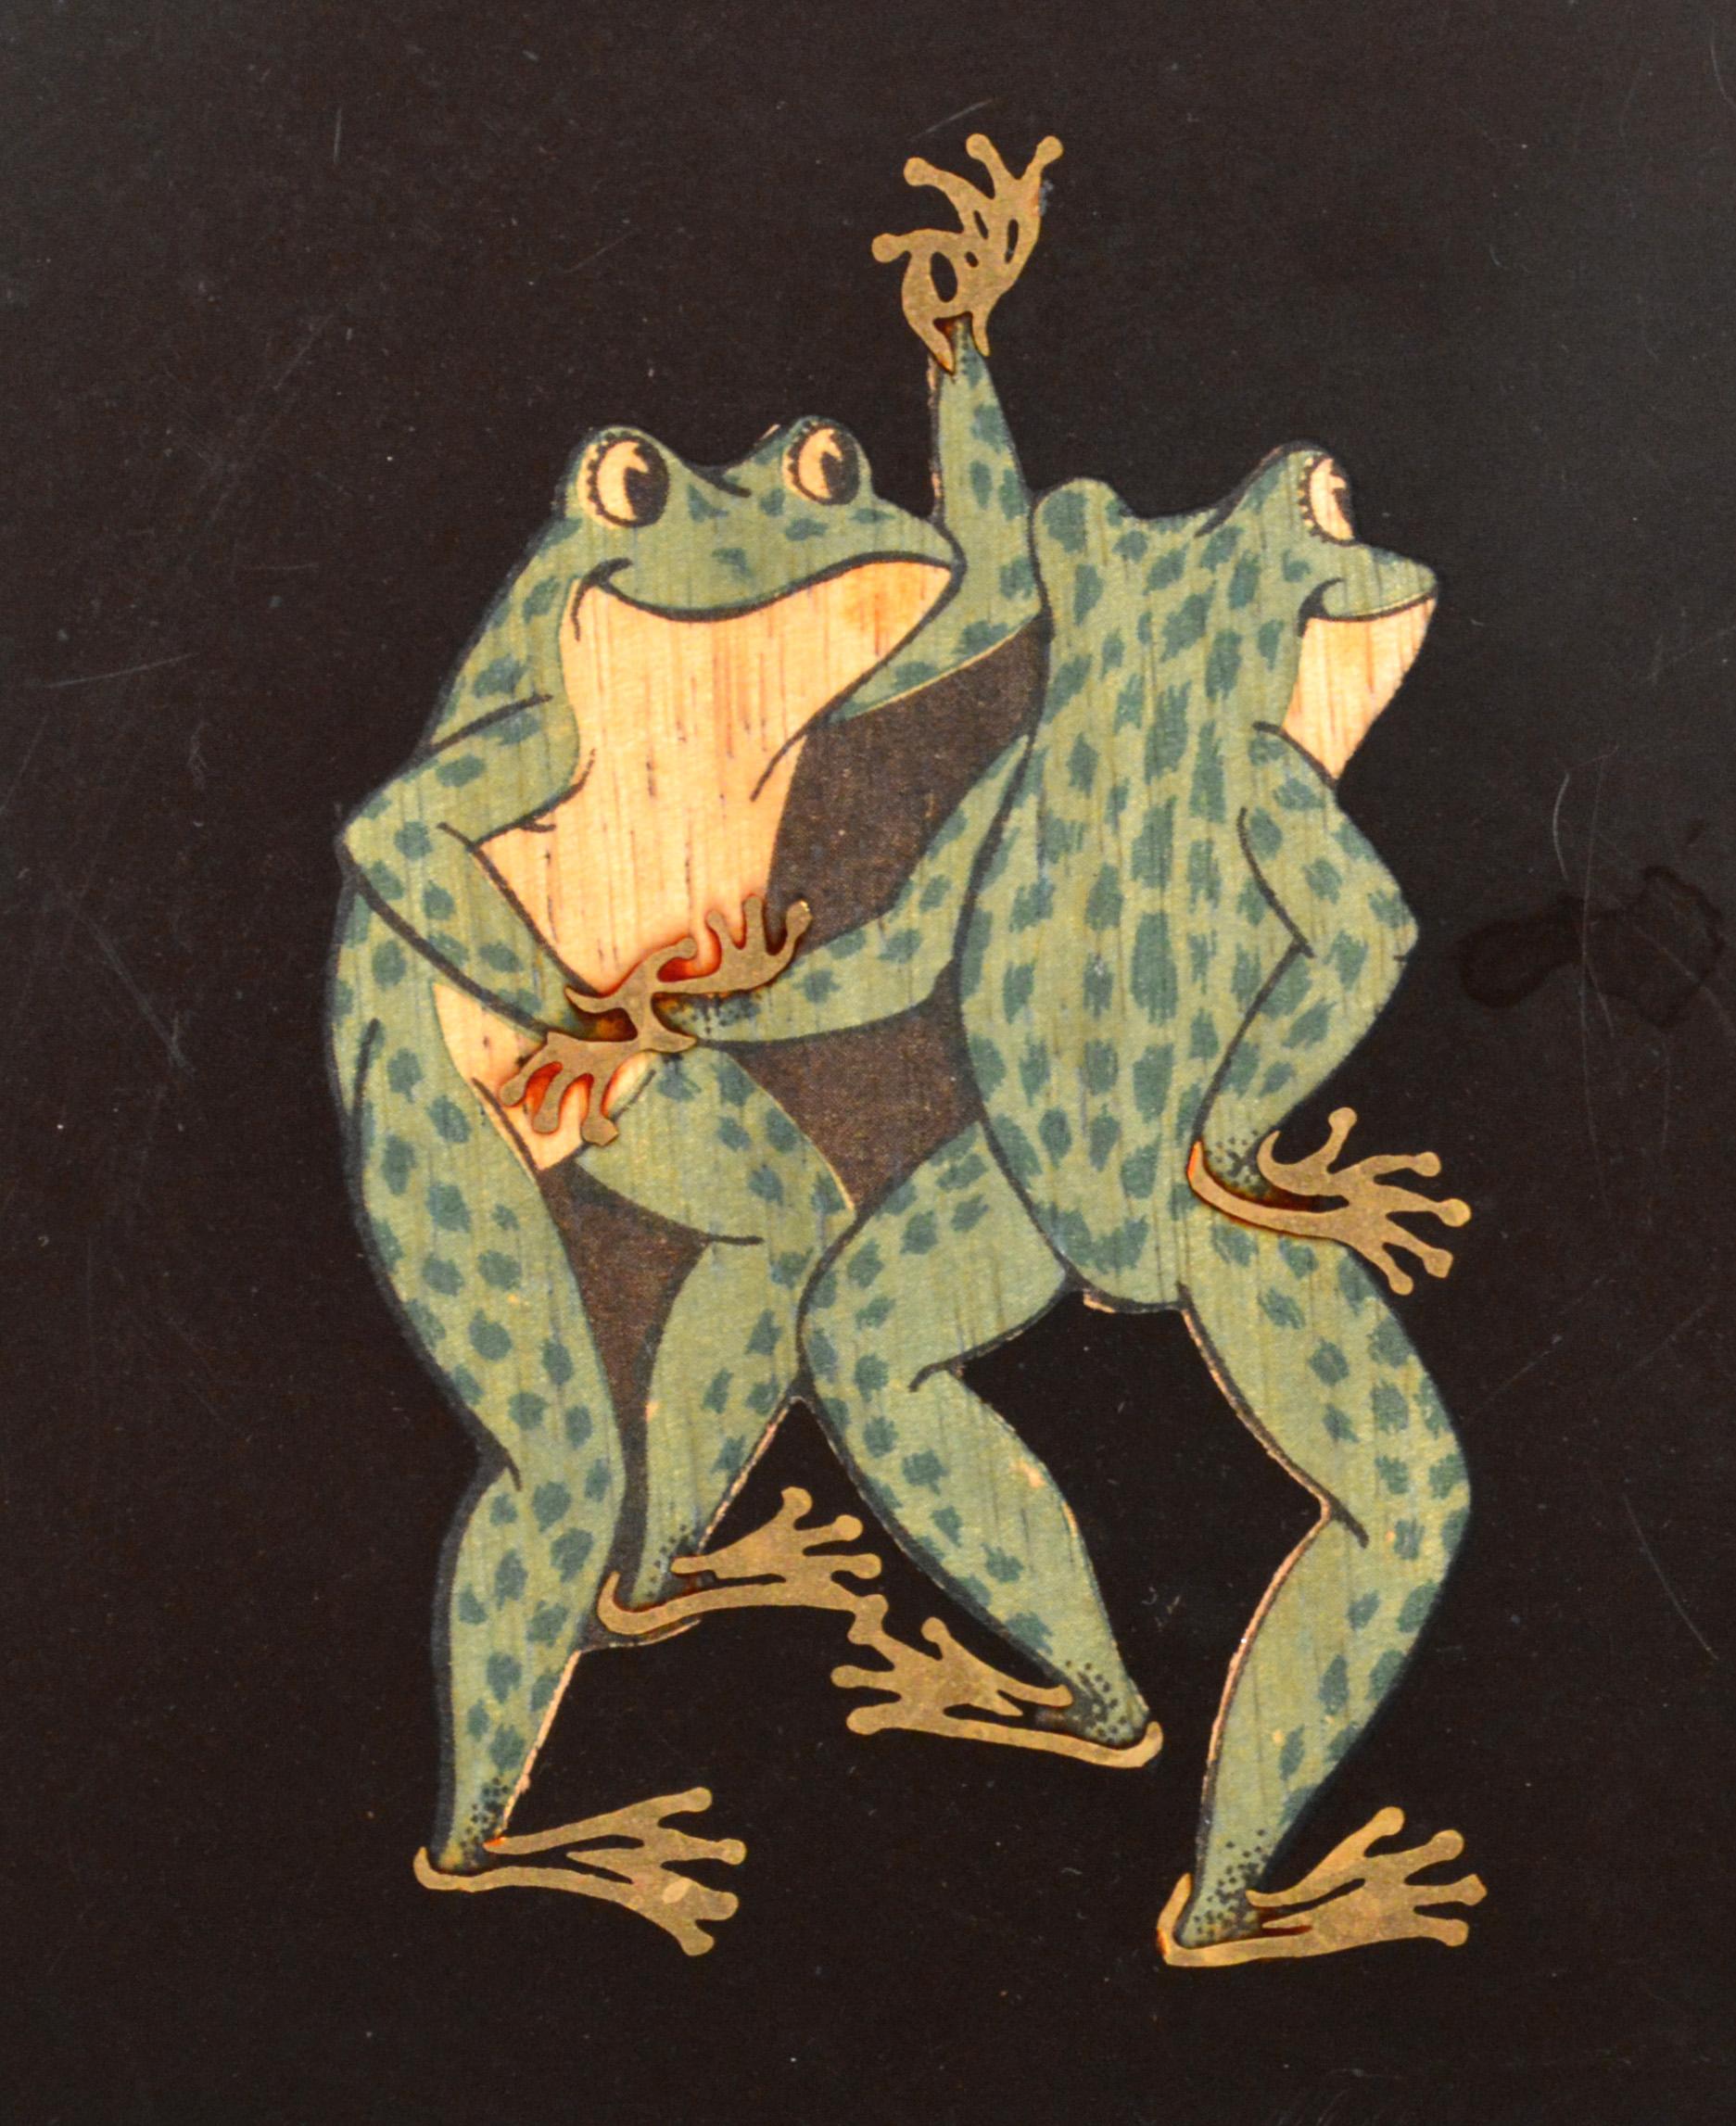 Couroc tray with frogs.
Resin,
Monterey, California
1970s.

Charming whimsical oval tray decorated with dancing frogs.

Dimensions: 9 5/8 inches deep x 12 1/2 inches wide x 3/4 inches high

Guthrie Courvoisier and his wife, Moira Wallace,